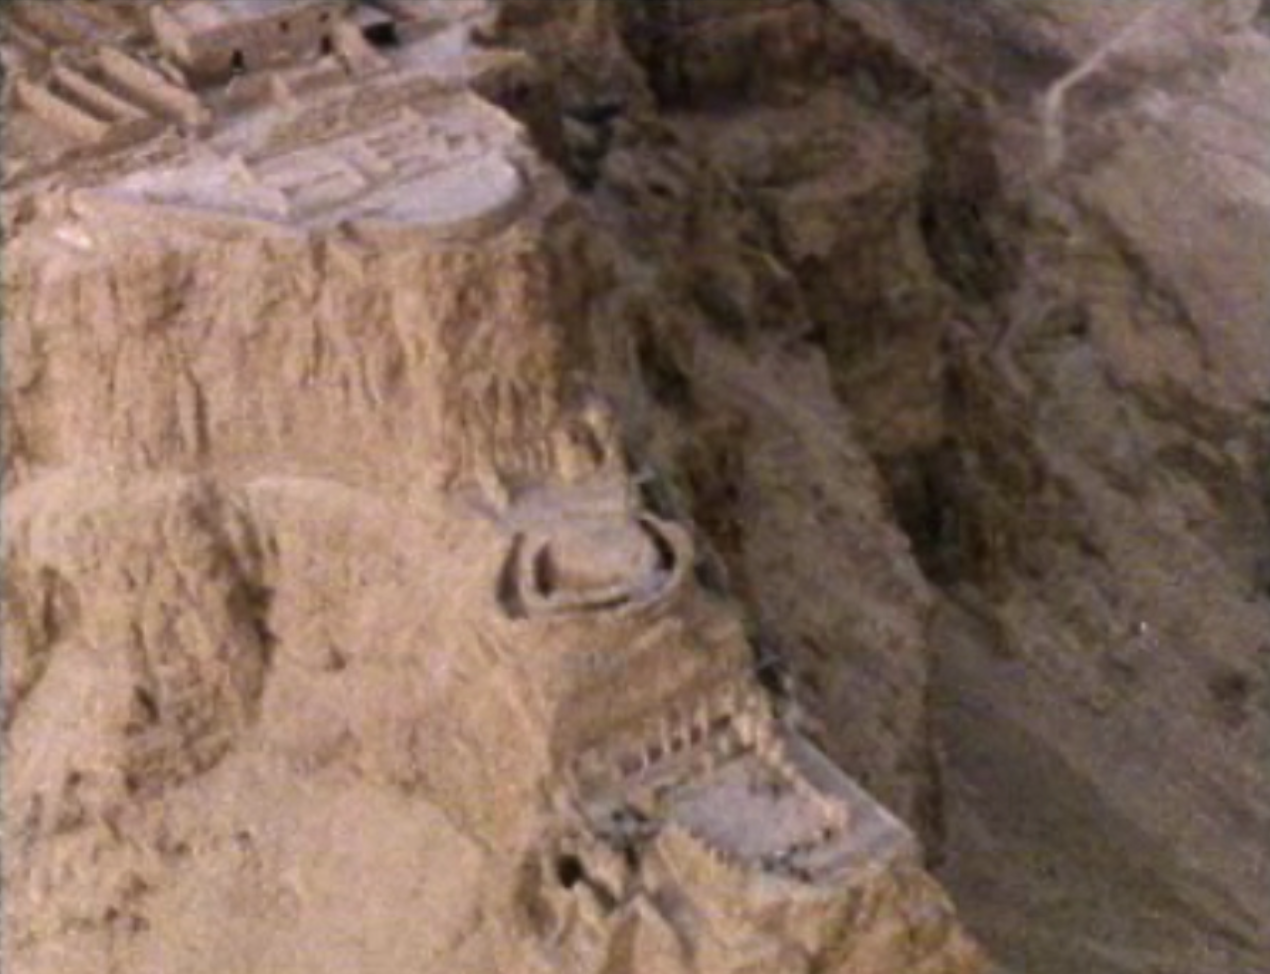 Aerial shots of the fortress of Masada, the site of Jewish resistance in the revolt against Roman rule 66-74CE. Masada had been built by King Herod in the first century CE on a plateau overlooking the Dead Sea and is now a UNESCO World Heritage site. The Roman siege of Masada and the last stand of the Sicarii defenders was described by the Jewish historian Josephus. The course reviewed the written and archaeological evidence relating to his account.